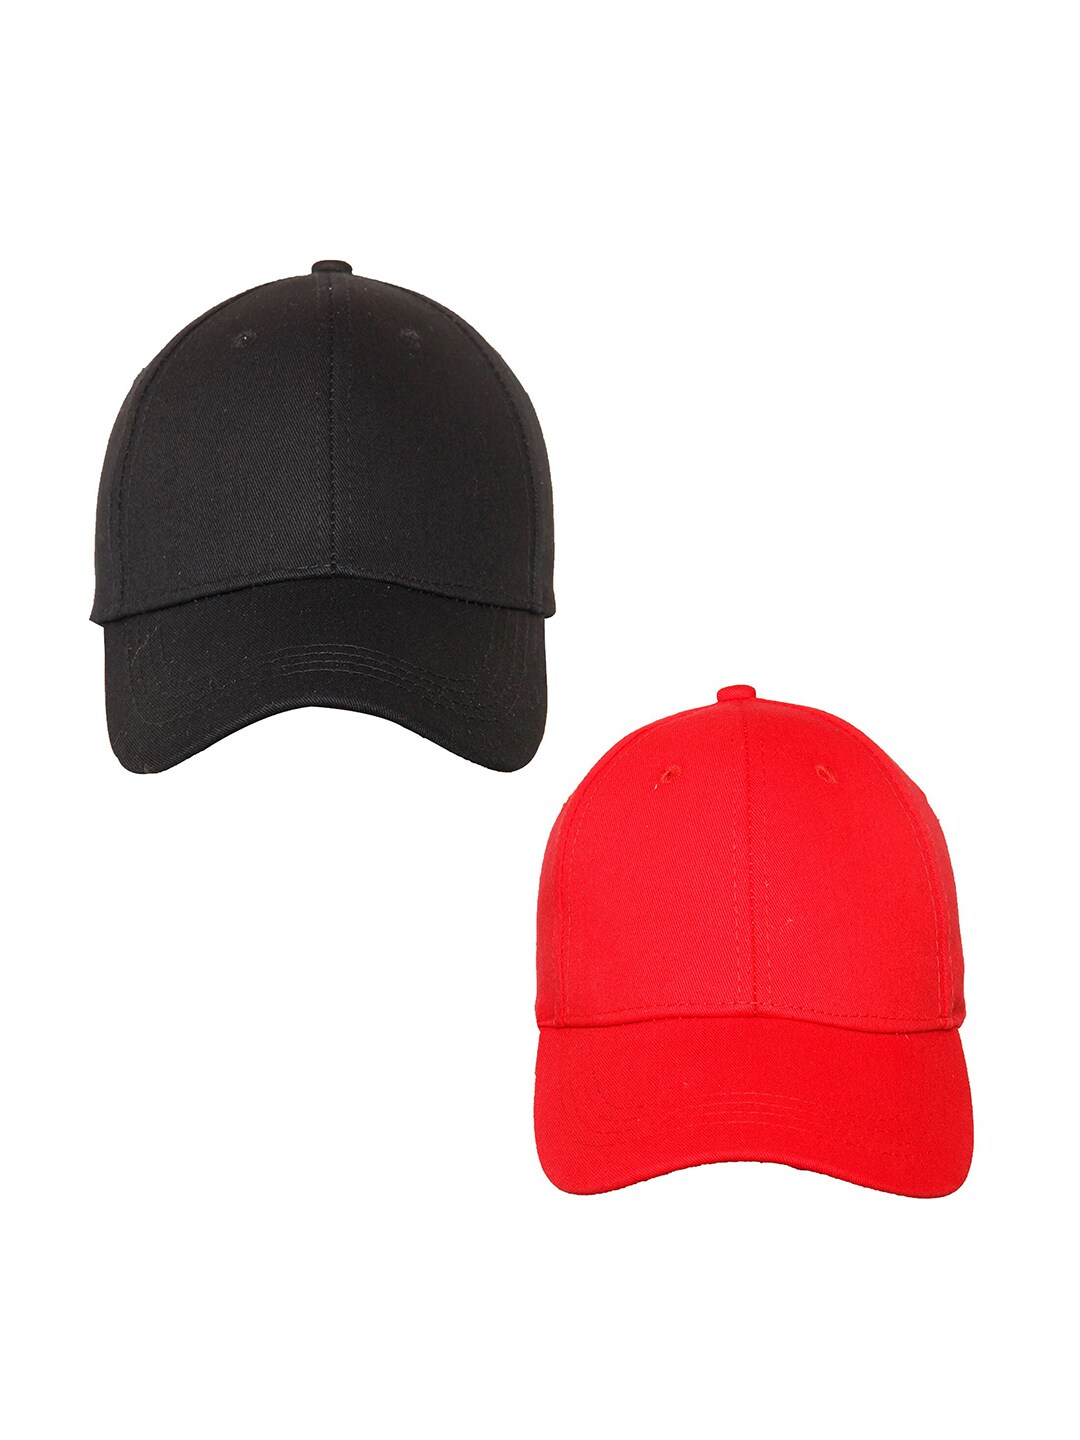 FabSeasons Pack of 2 Unisex Black & Red Solid Baseball Cap with Adjustable Buckle Price in India